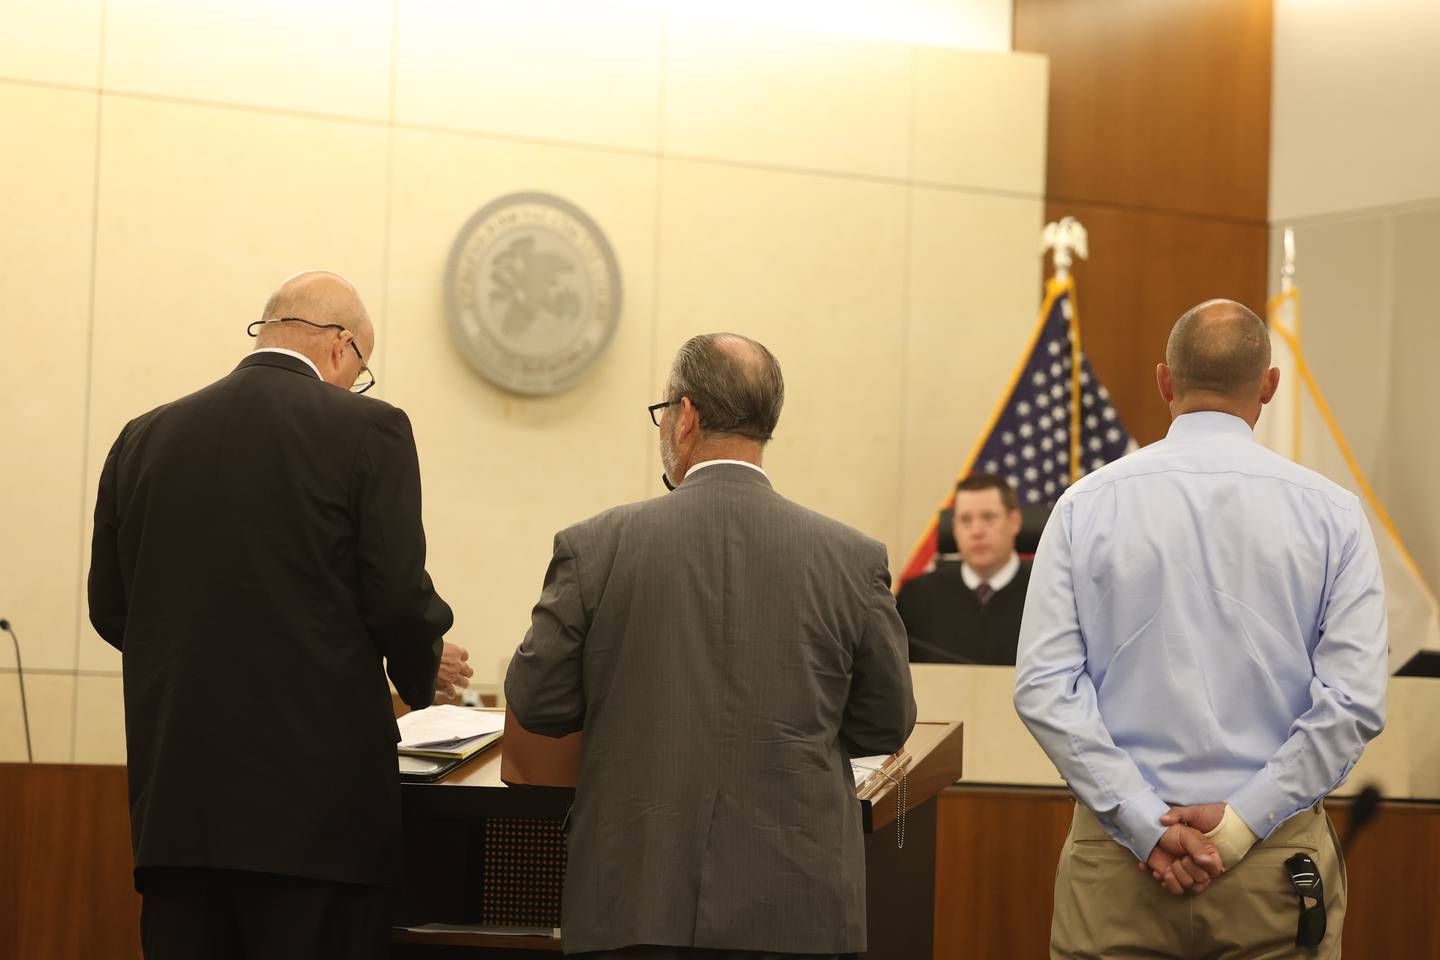 Prosecuting attorney Bill Elward, left, defense attorney Robert Bodach and his client Edward Goewey meet with Judge Brian Barrett during a pretrial meeting. Goewey, a Will County Deputy, is on trial for disorderly conduct after he allegedly yelled at school officials and threatened to personally remove a child believed to have made a threat to shoot students at St. Mary Catholic School in Modena. Tuesday, Aug. 9, 2022, in Joliet.